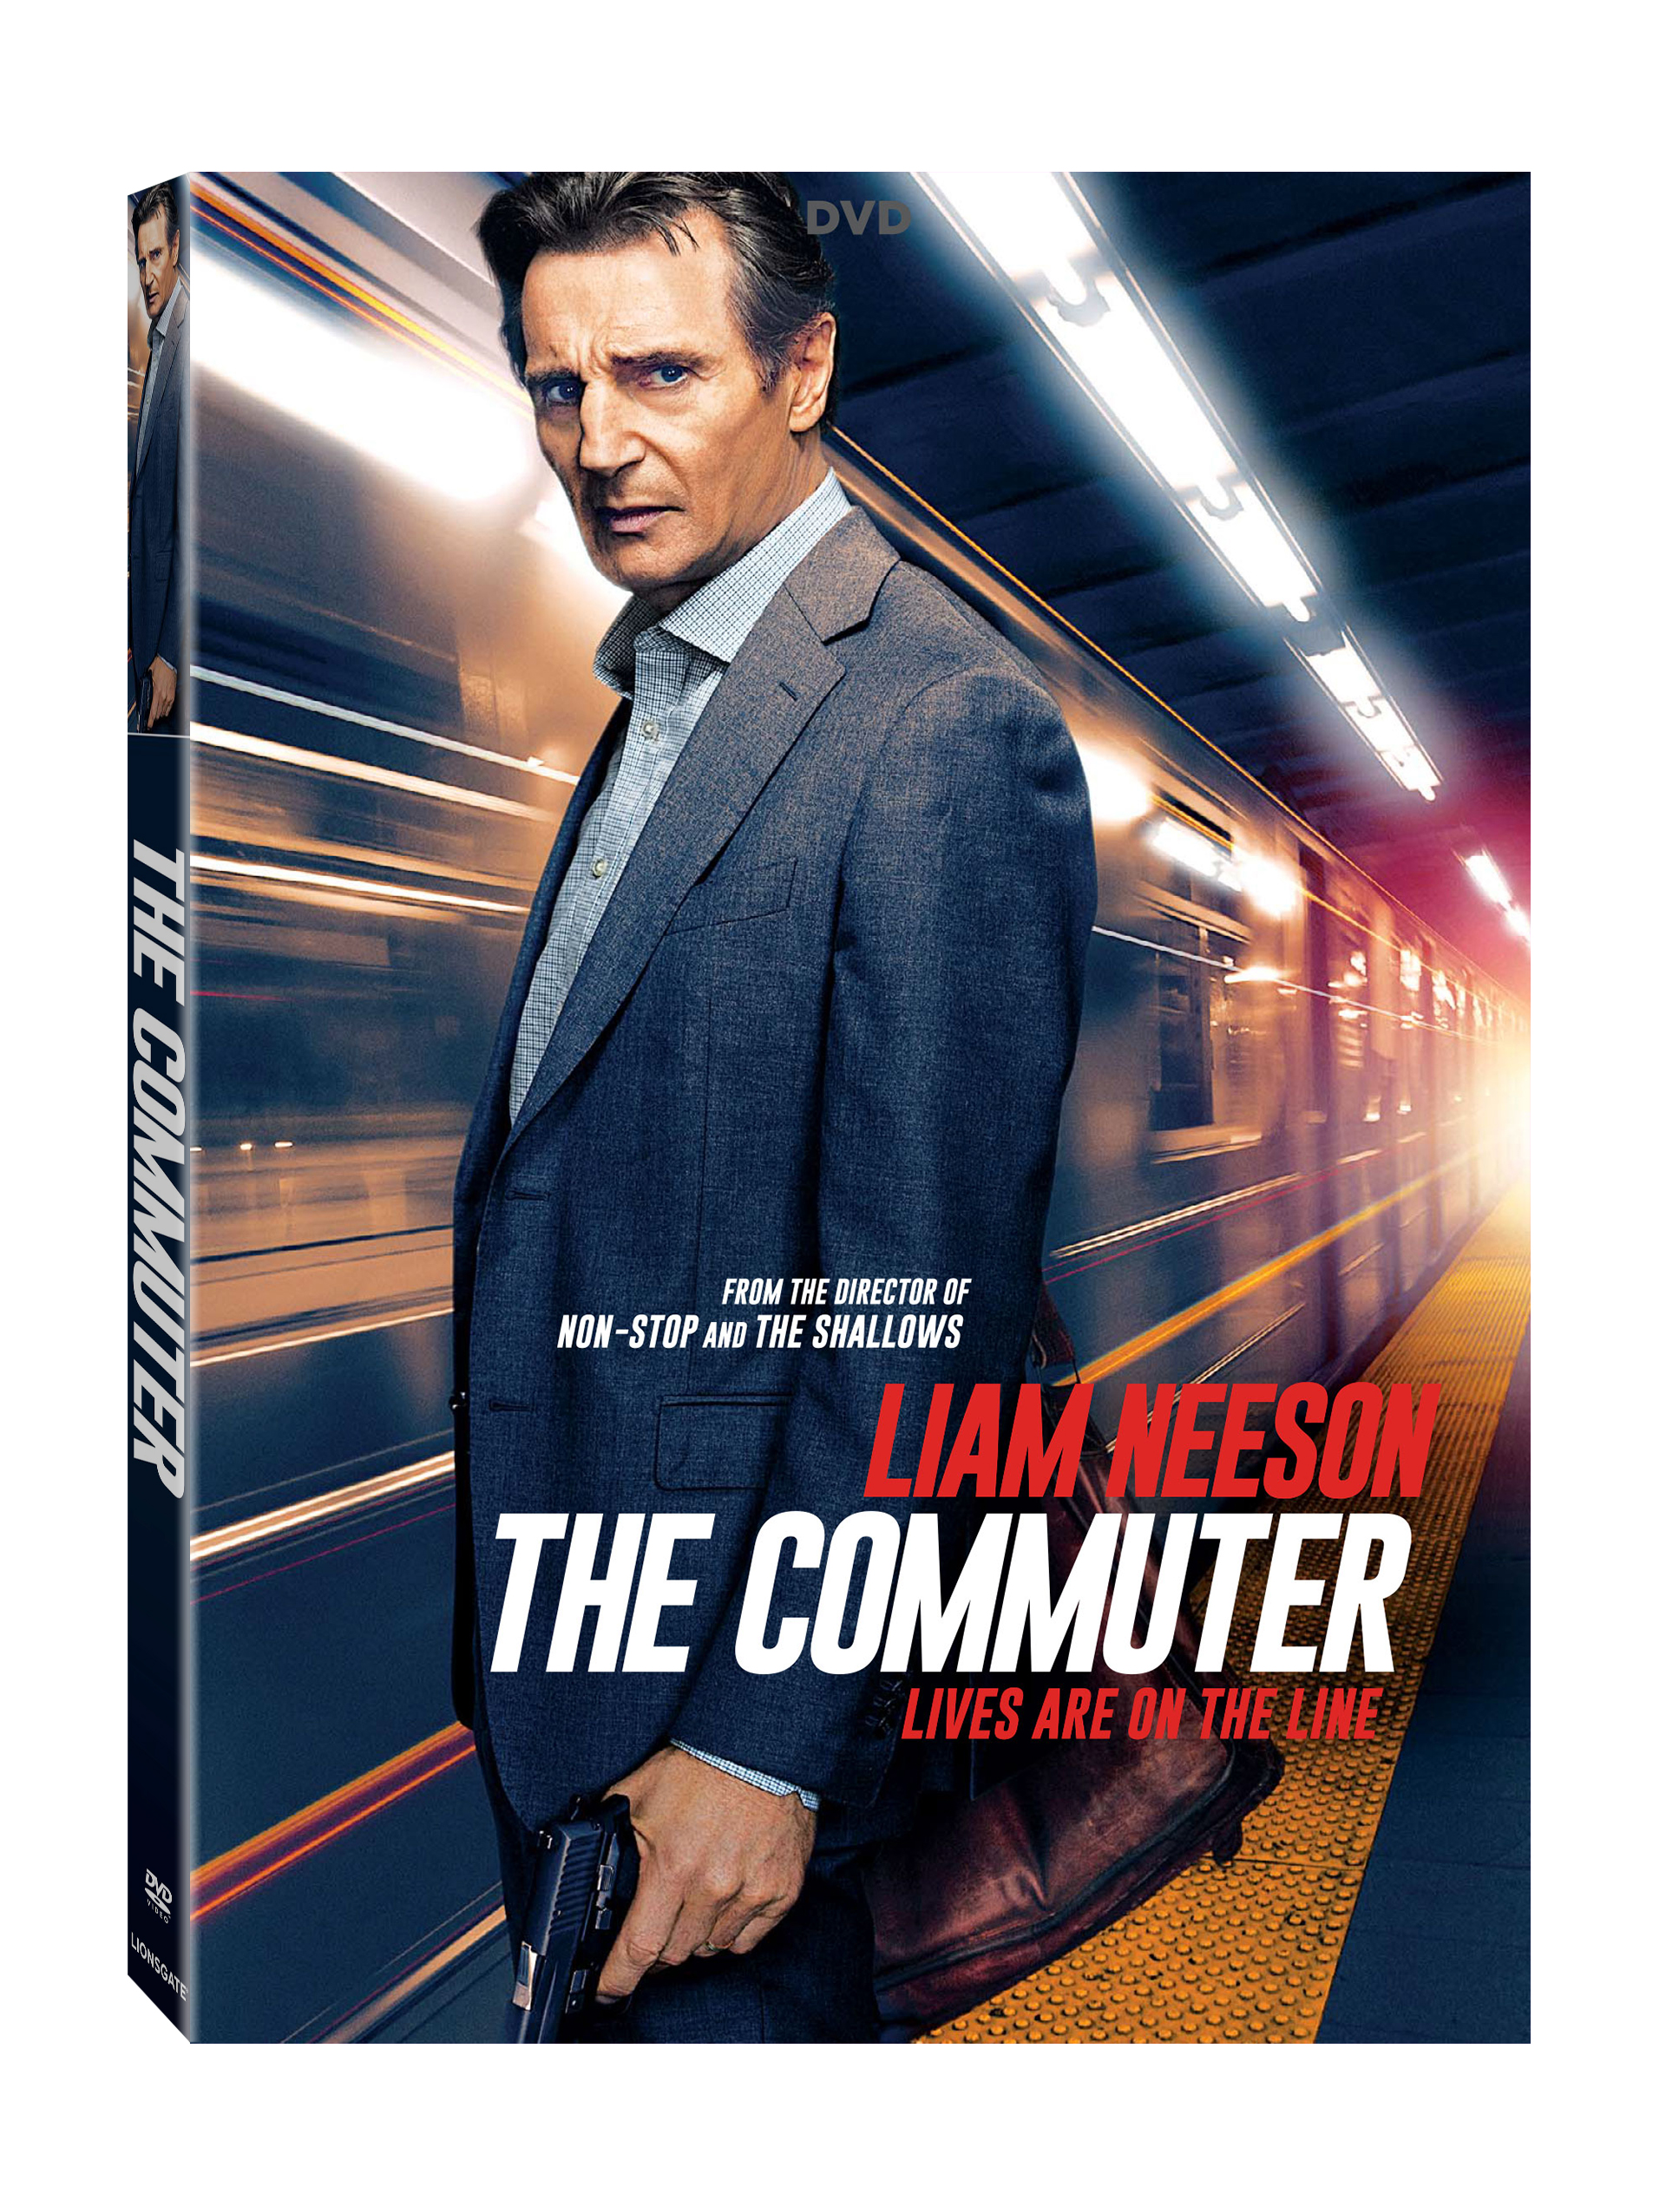 The Commuter DVD cover (Lionsgate Home Entertainment)